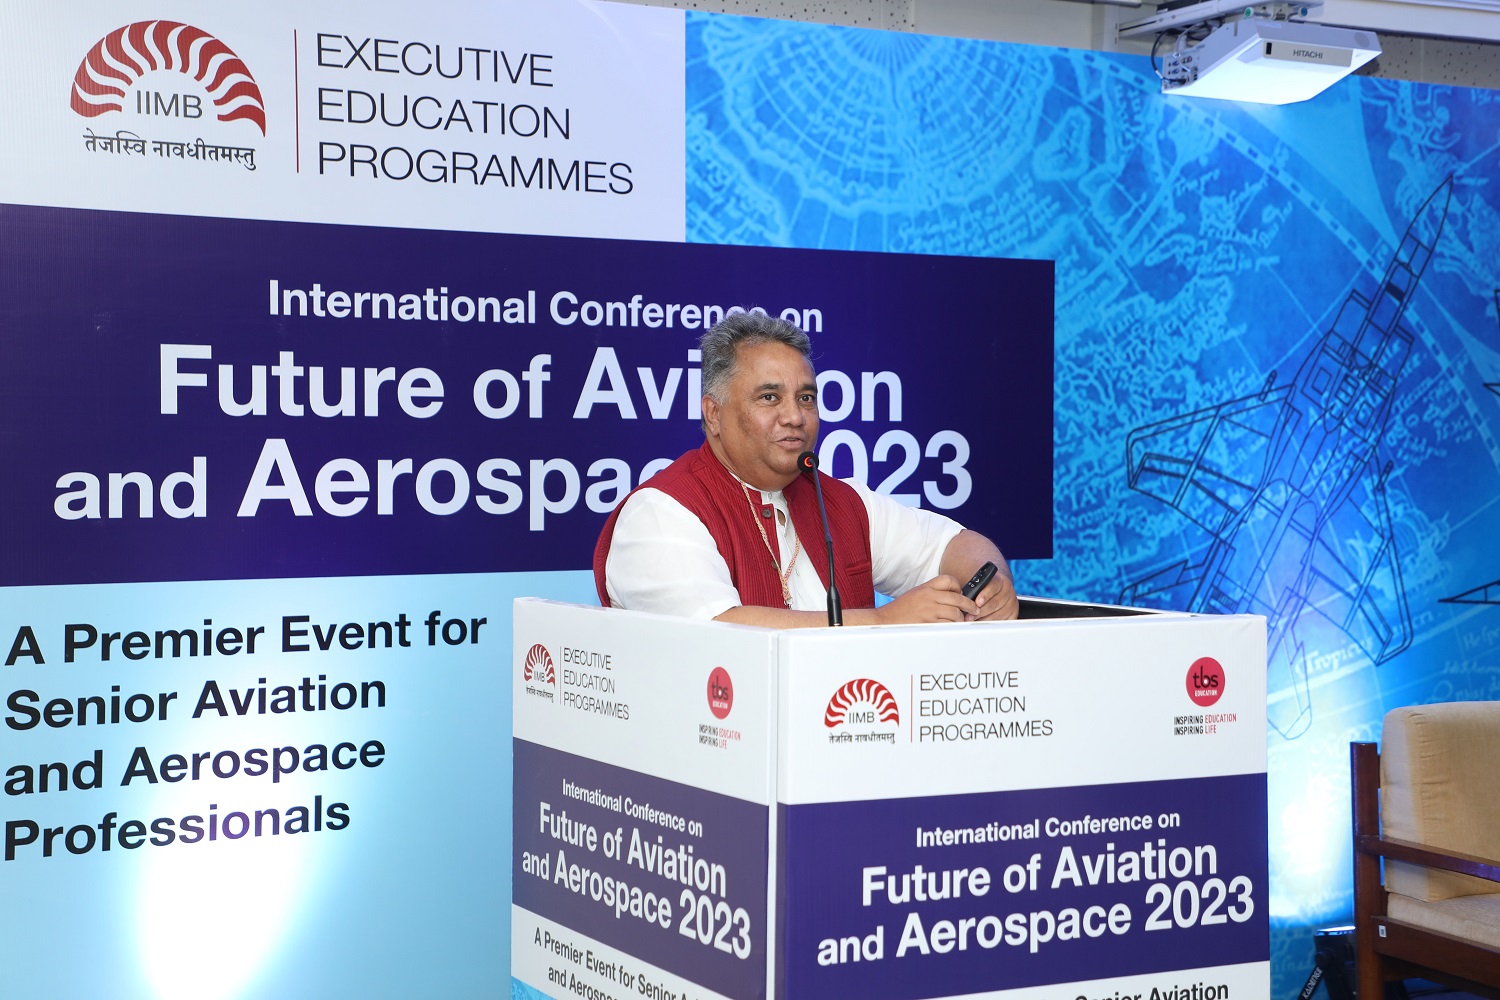 Mr. Suraj Chettri, Head of Human Resources, Airbus - India, spoke on managing talent in the aviation industry at FOAA 2023.